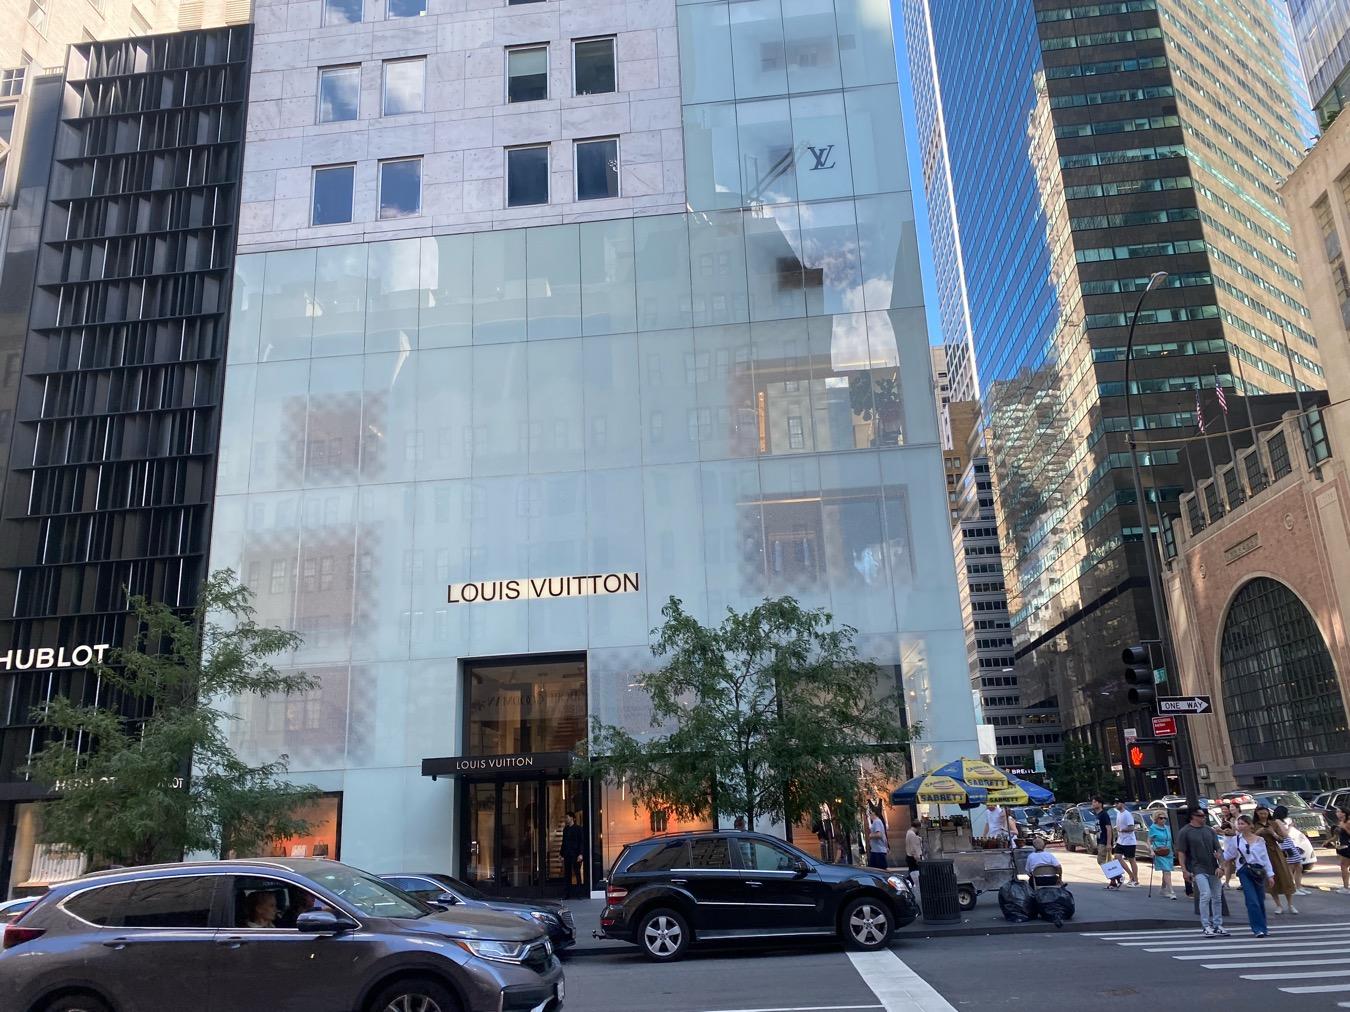 Louis Vuitton store front entrance in 1 East 57th Street